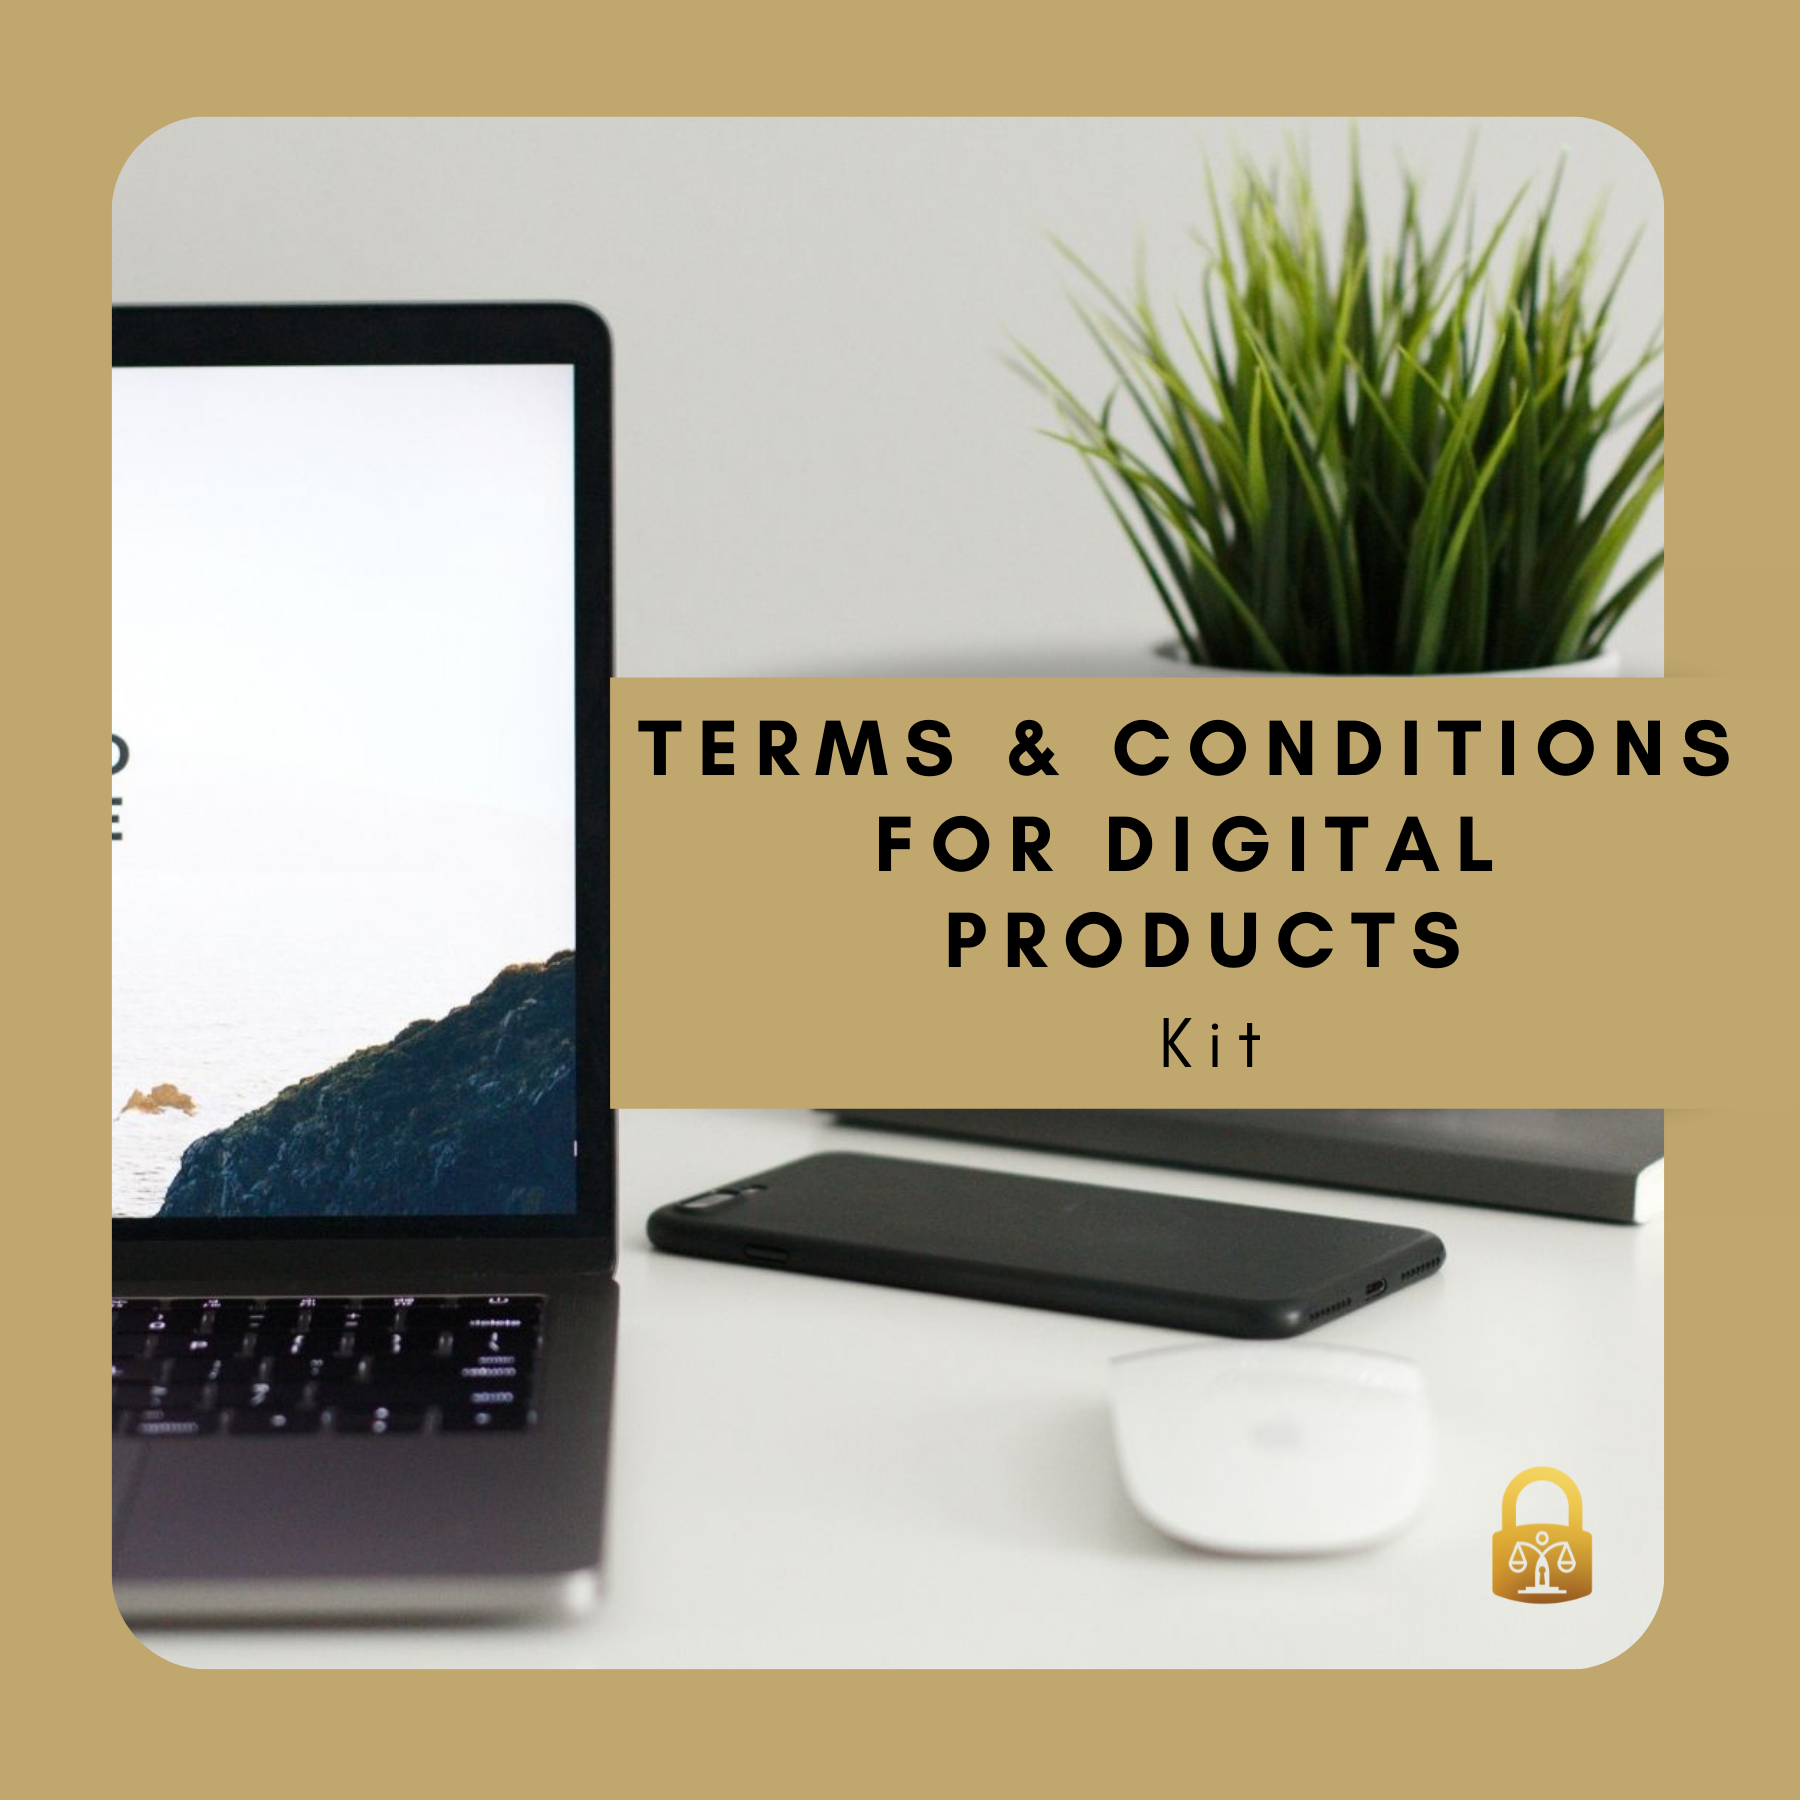 Terms & Conditions for Digital Products Kit